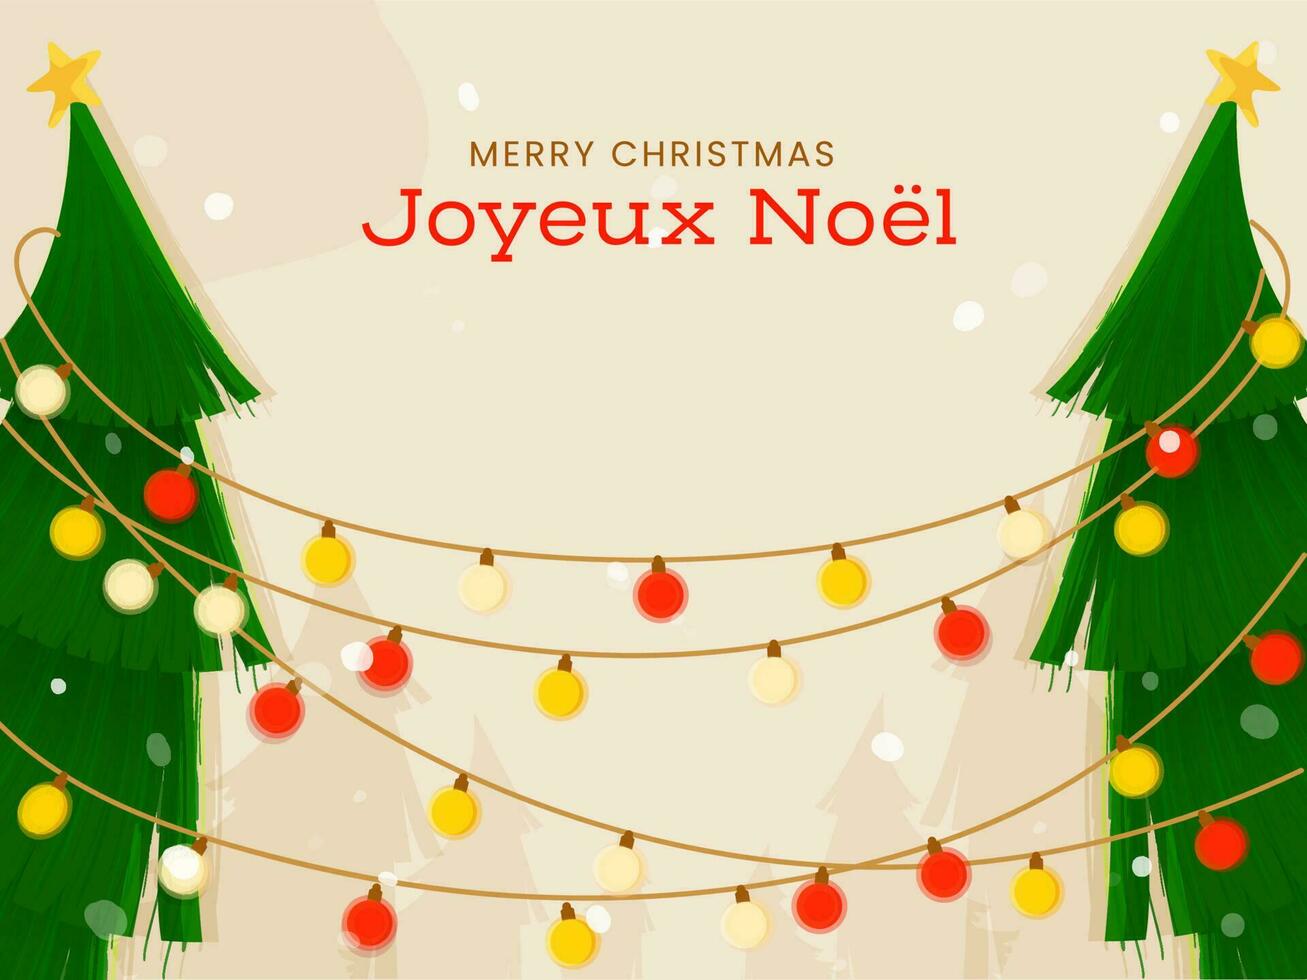 Merry Christmas Font In French Language With Xmas Or Fir Trees Decorated By Lighting Or Bauble Garland On Beige Background. vector